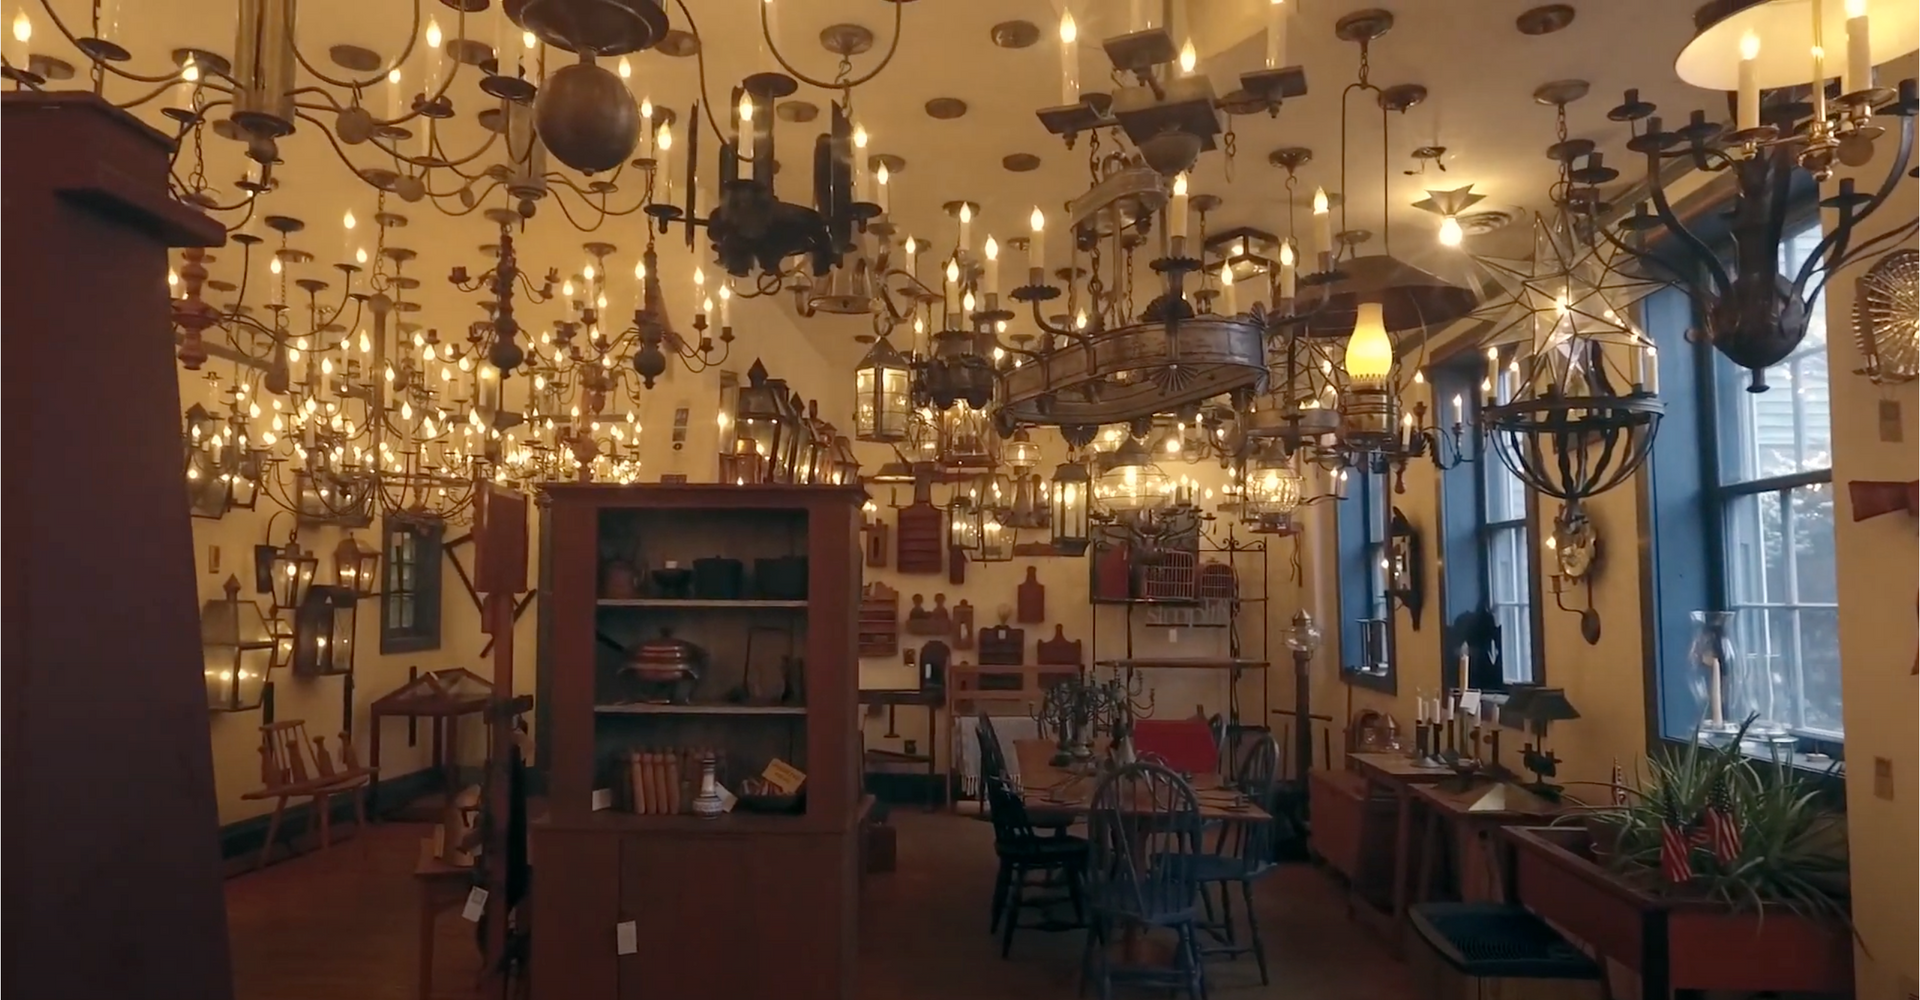 Load video: Our virtual showroom tour gives customers a chance to peruse all that we have on offer from the comfort of their own home. Glistening chandeliers, sparkling sconces and lanterns adorn every inch of the ceiling and walls. Hand-built wooden and metal furniture fill the space.